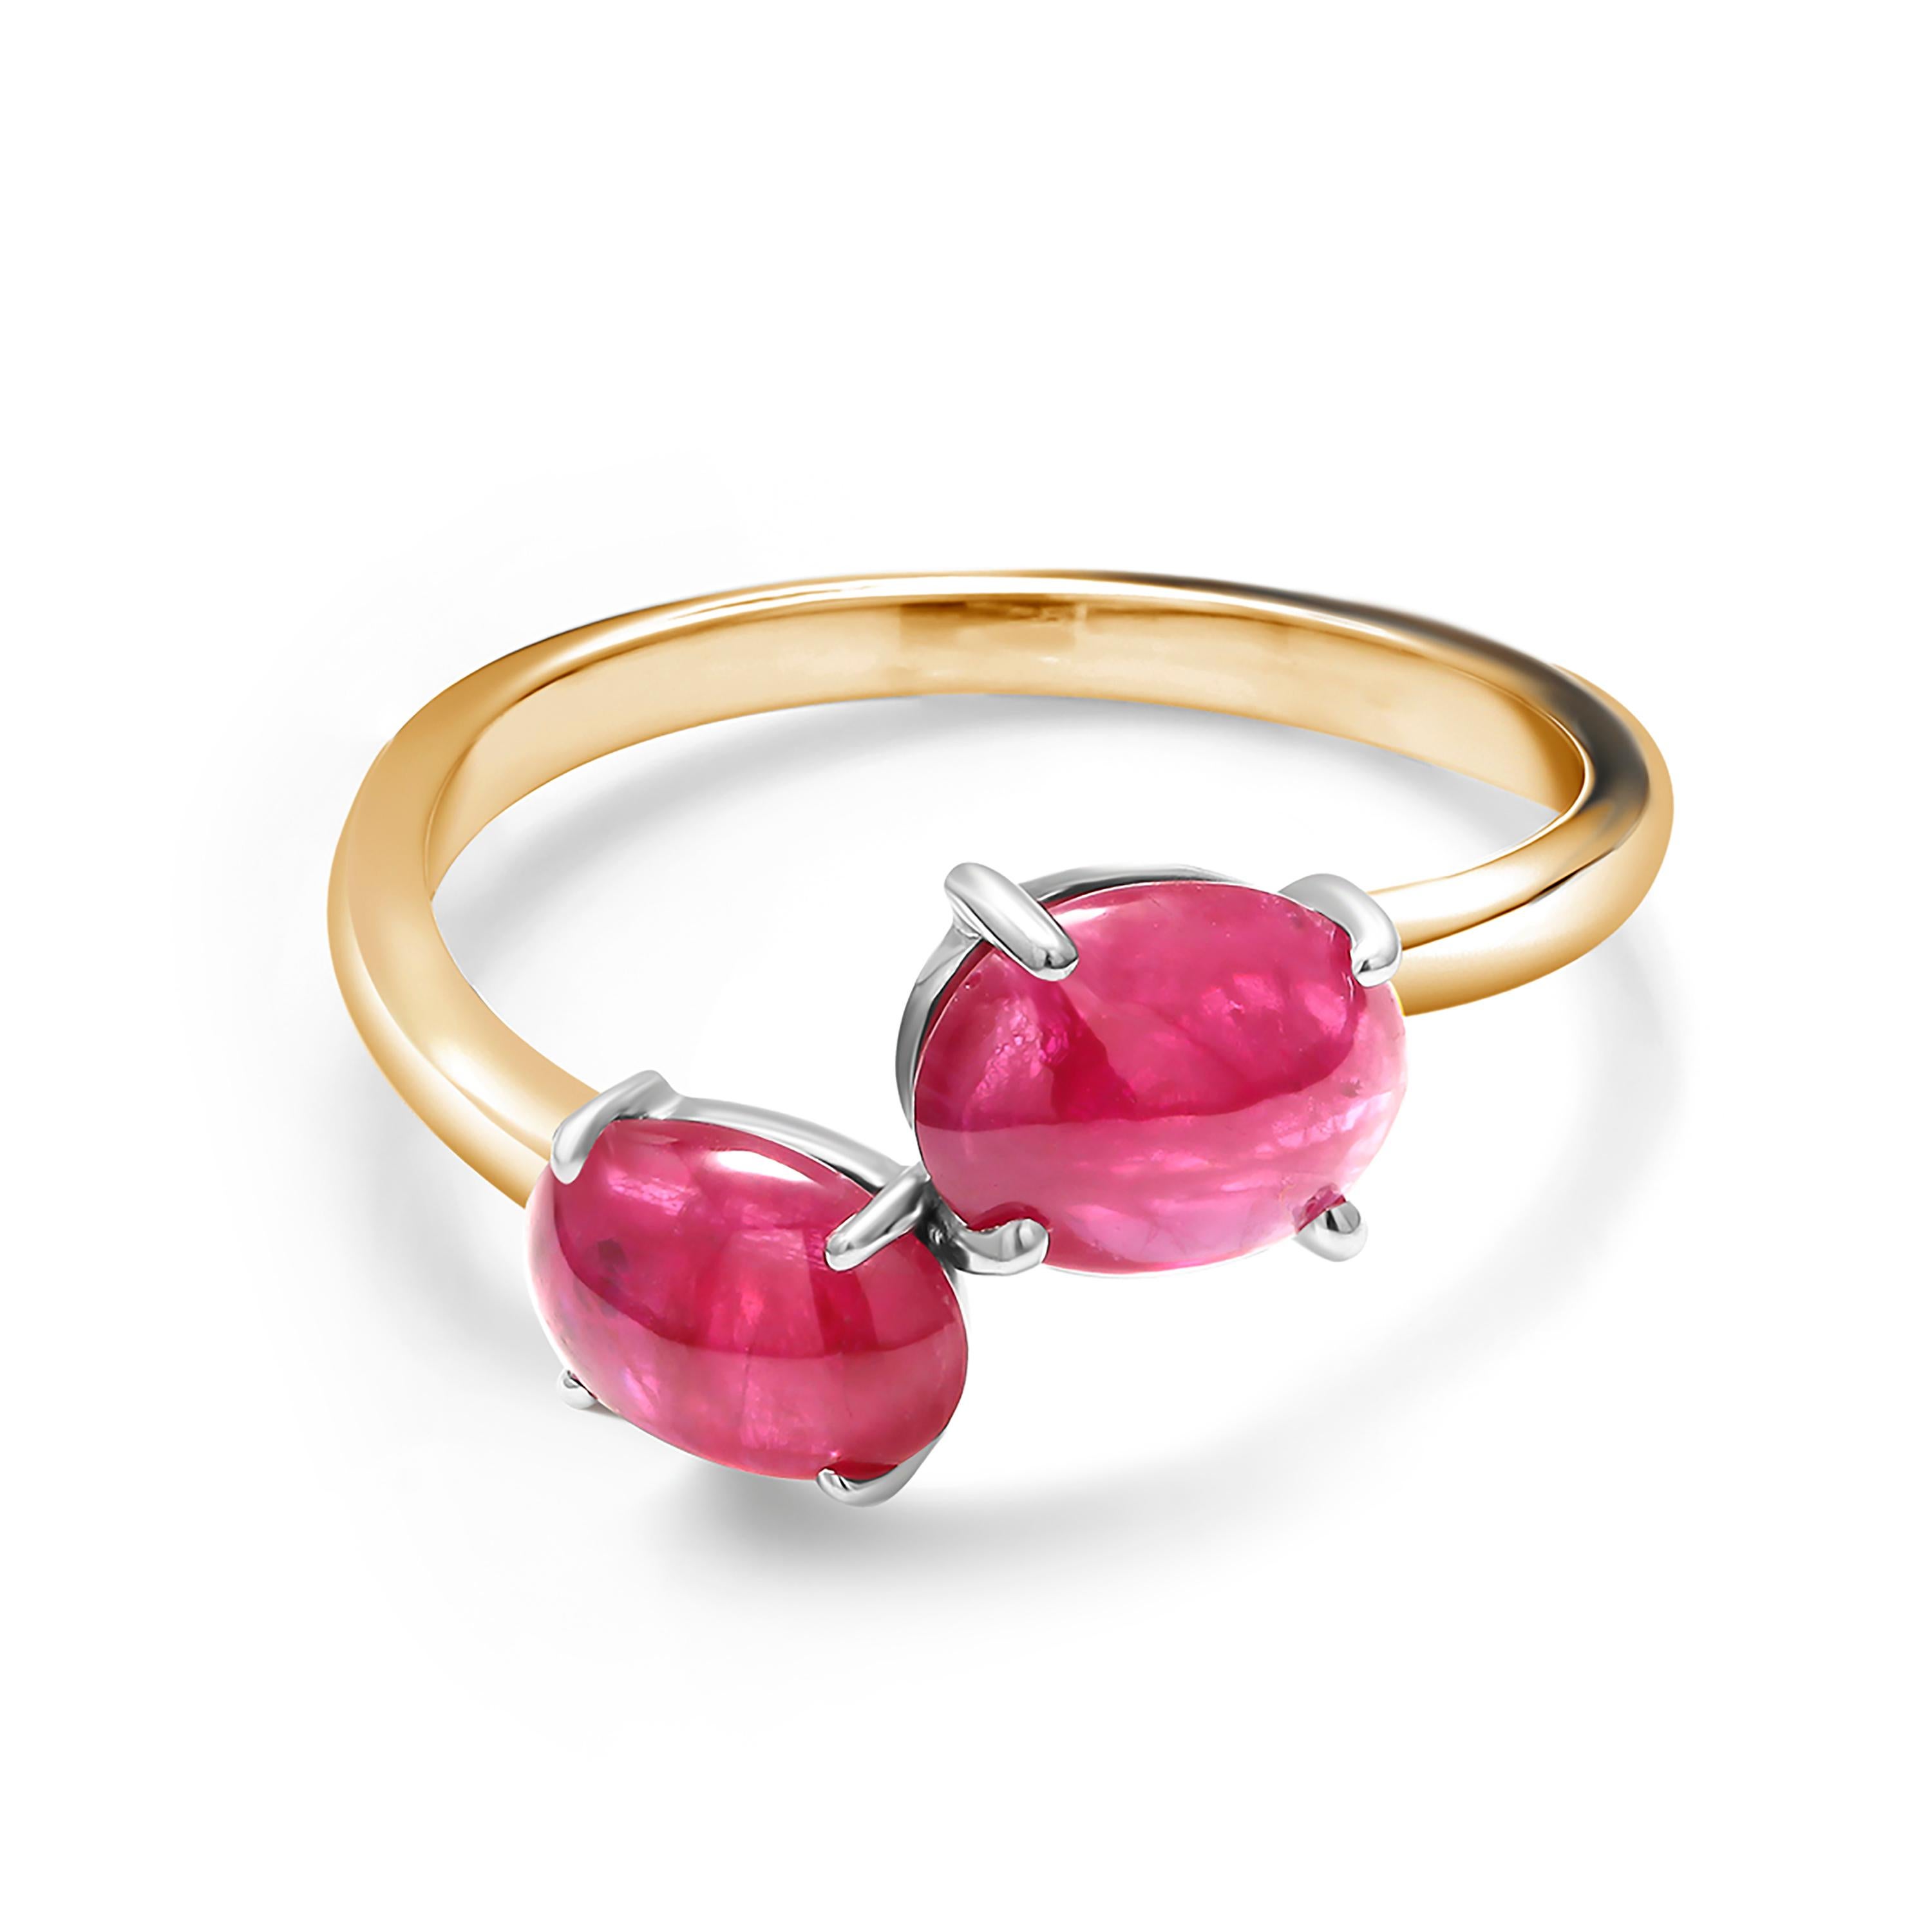 Contemporary Two Cabochon Burma Rubies Facing Gold Cocktail Ring Weighing 3.90 Carats